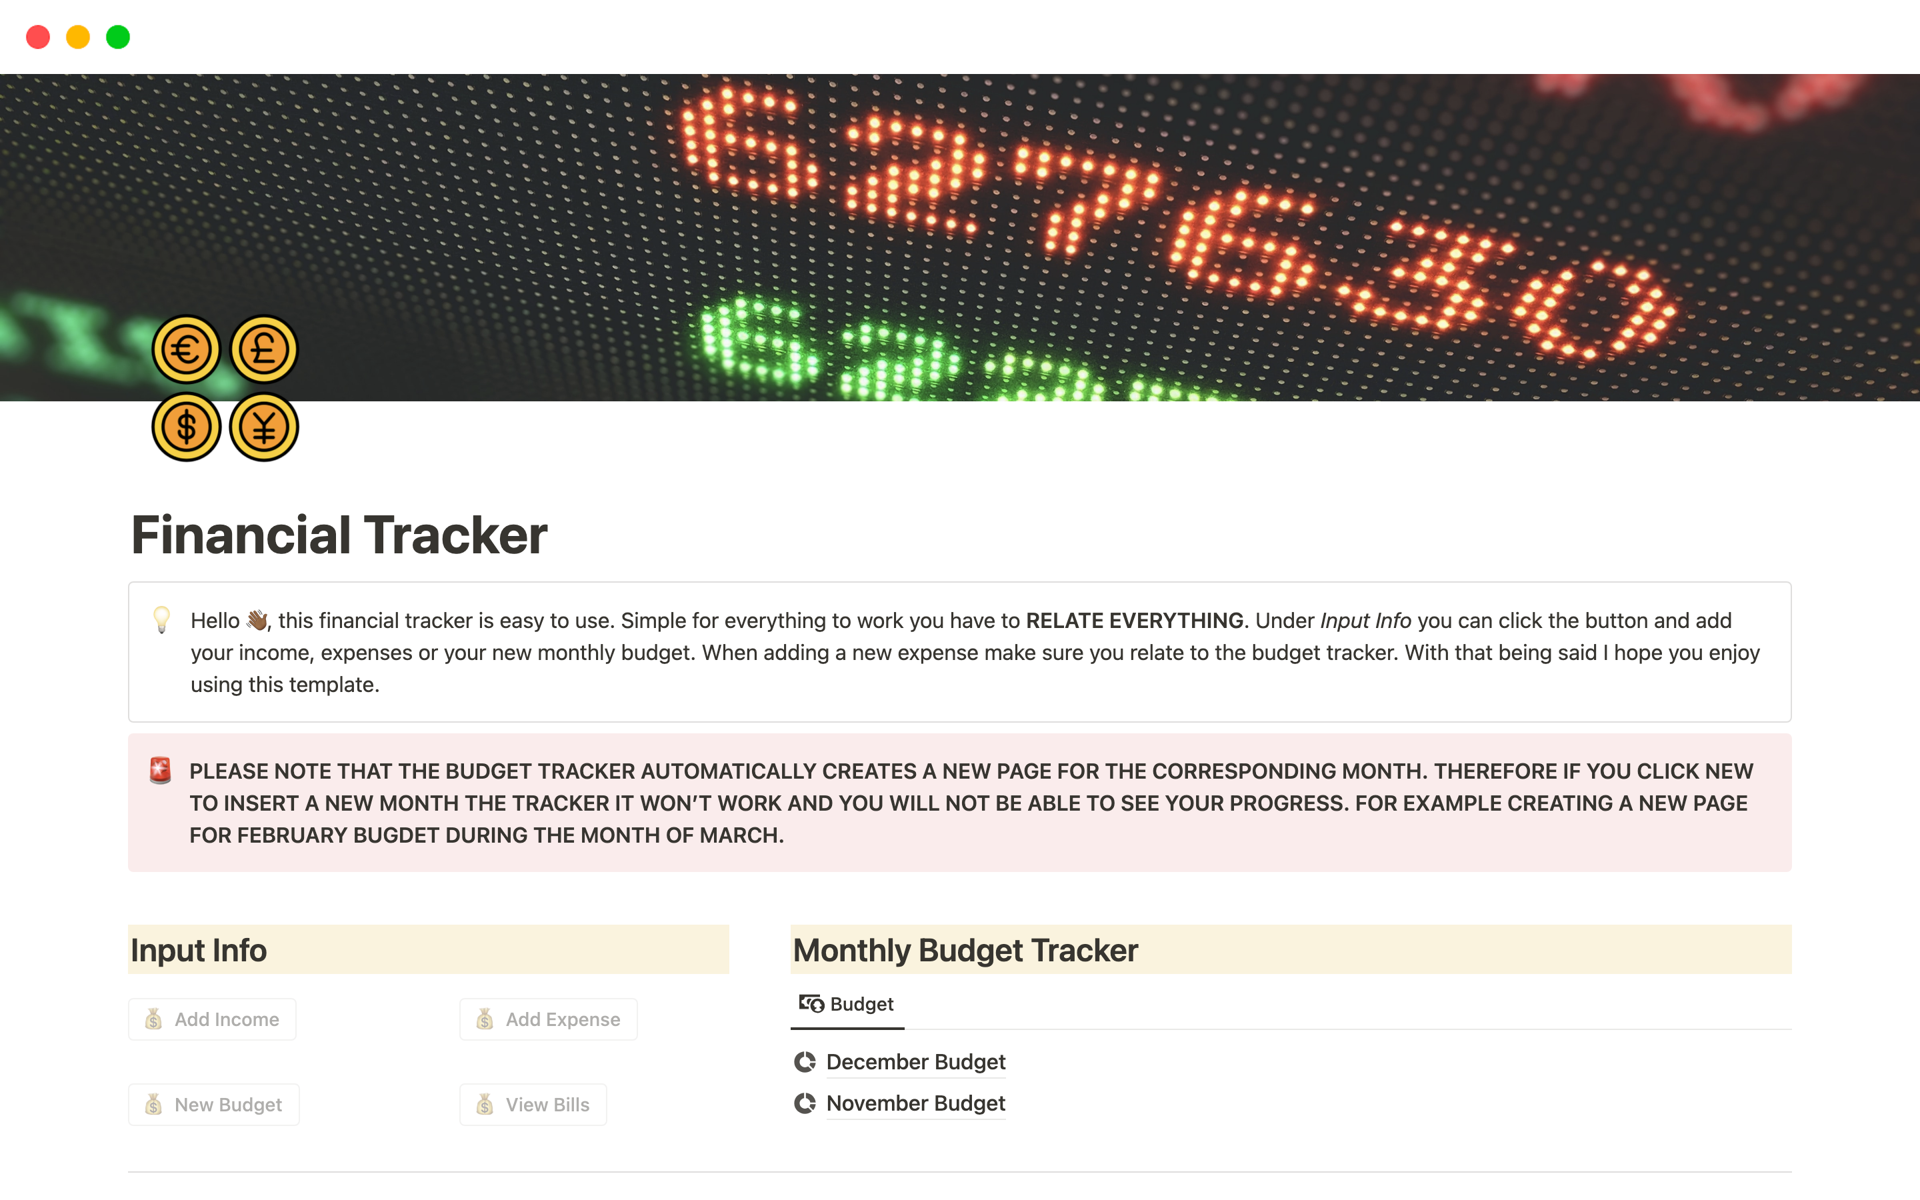 An easy-to-use beginner friendly financial tracker.